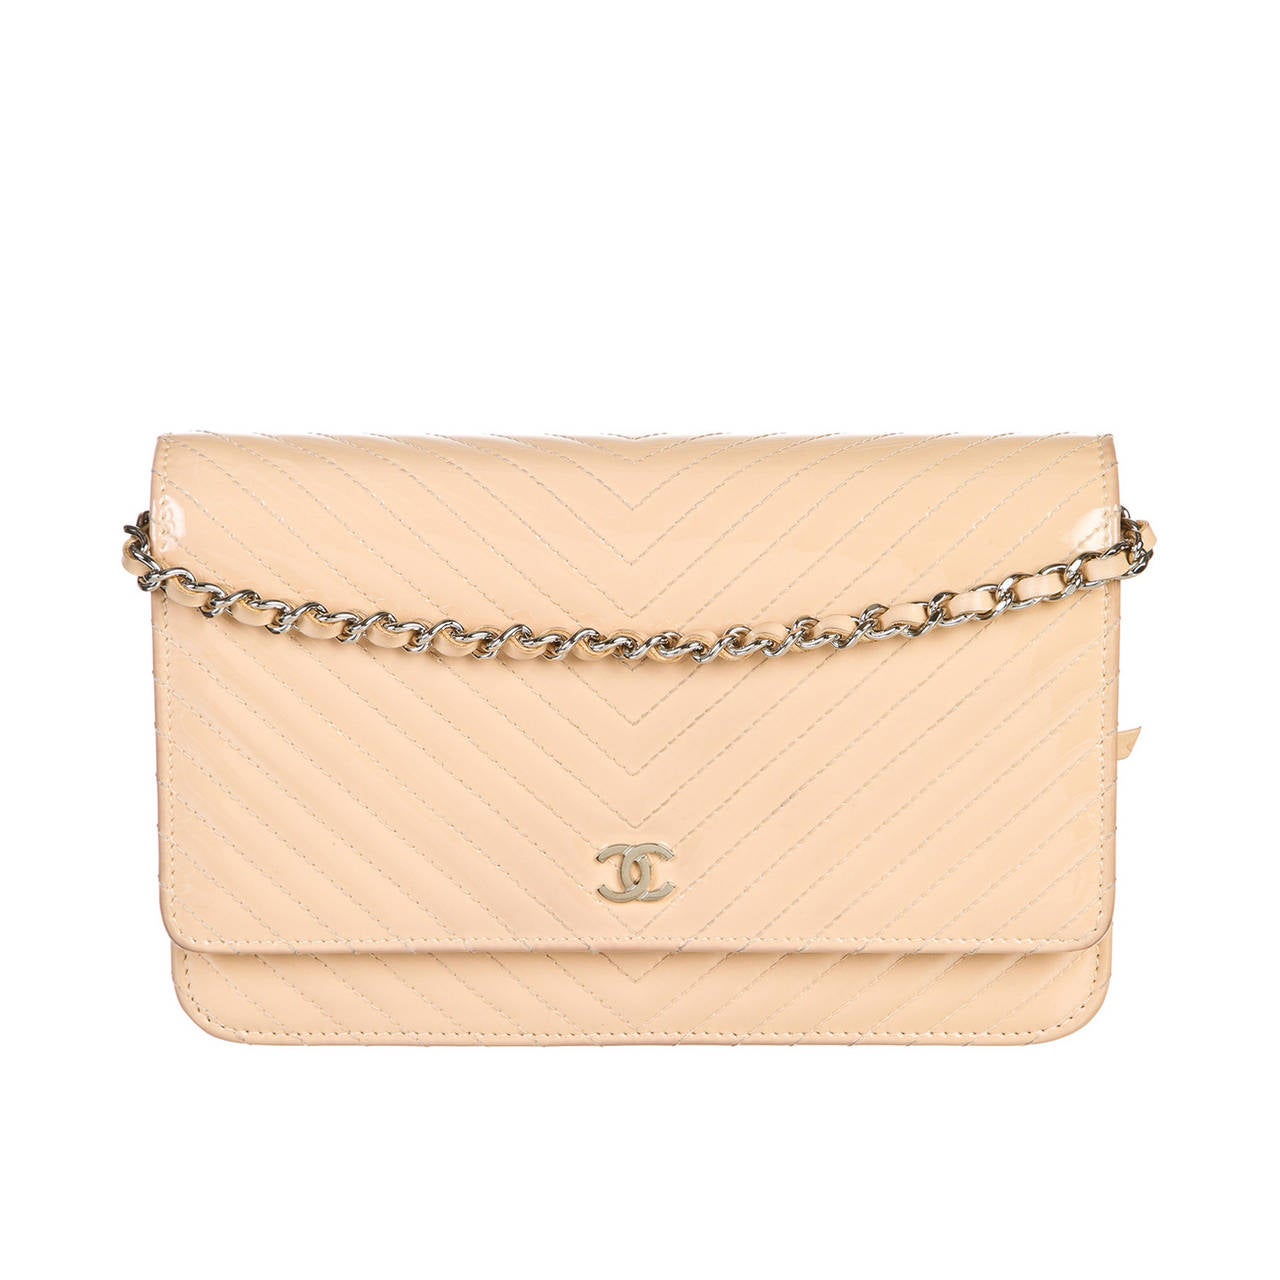 Chanel Biege Patent Leather Chevron Quilted WOC Wallet on a Chain Handbag For Sale